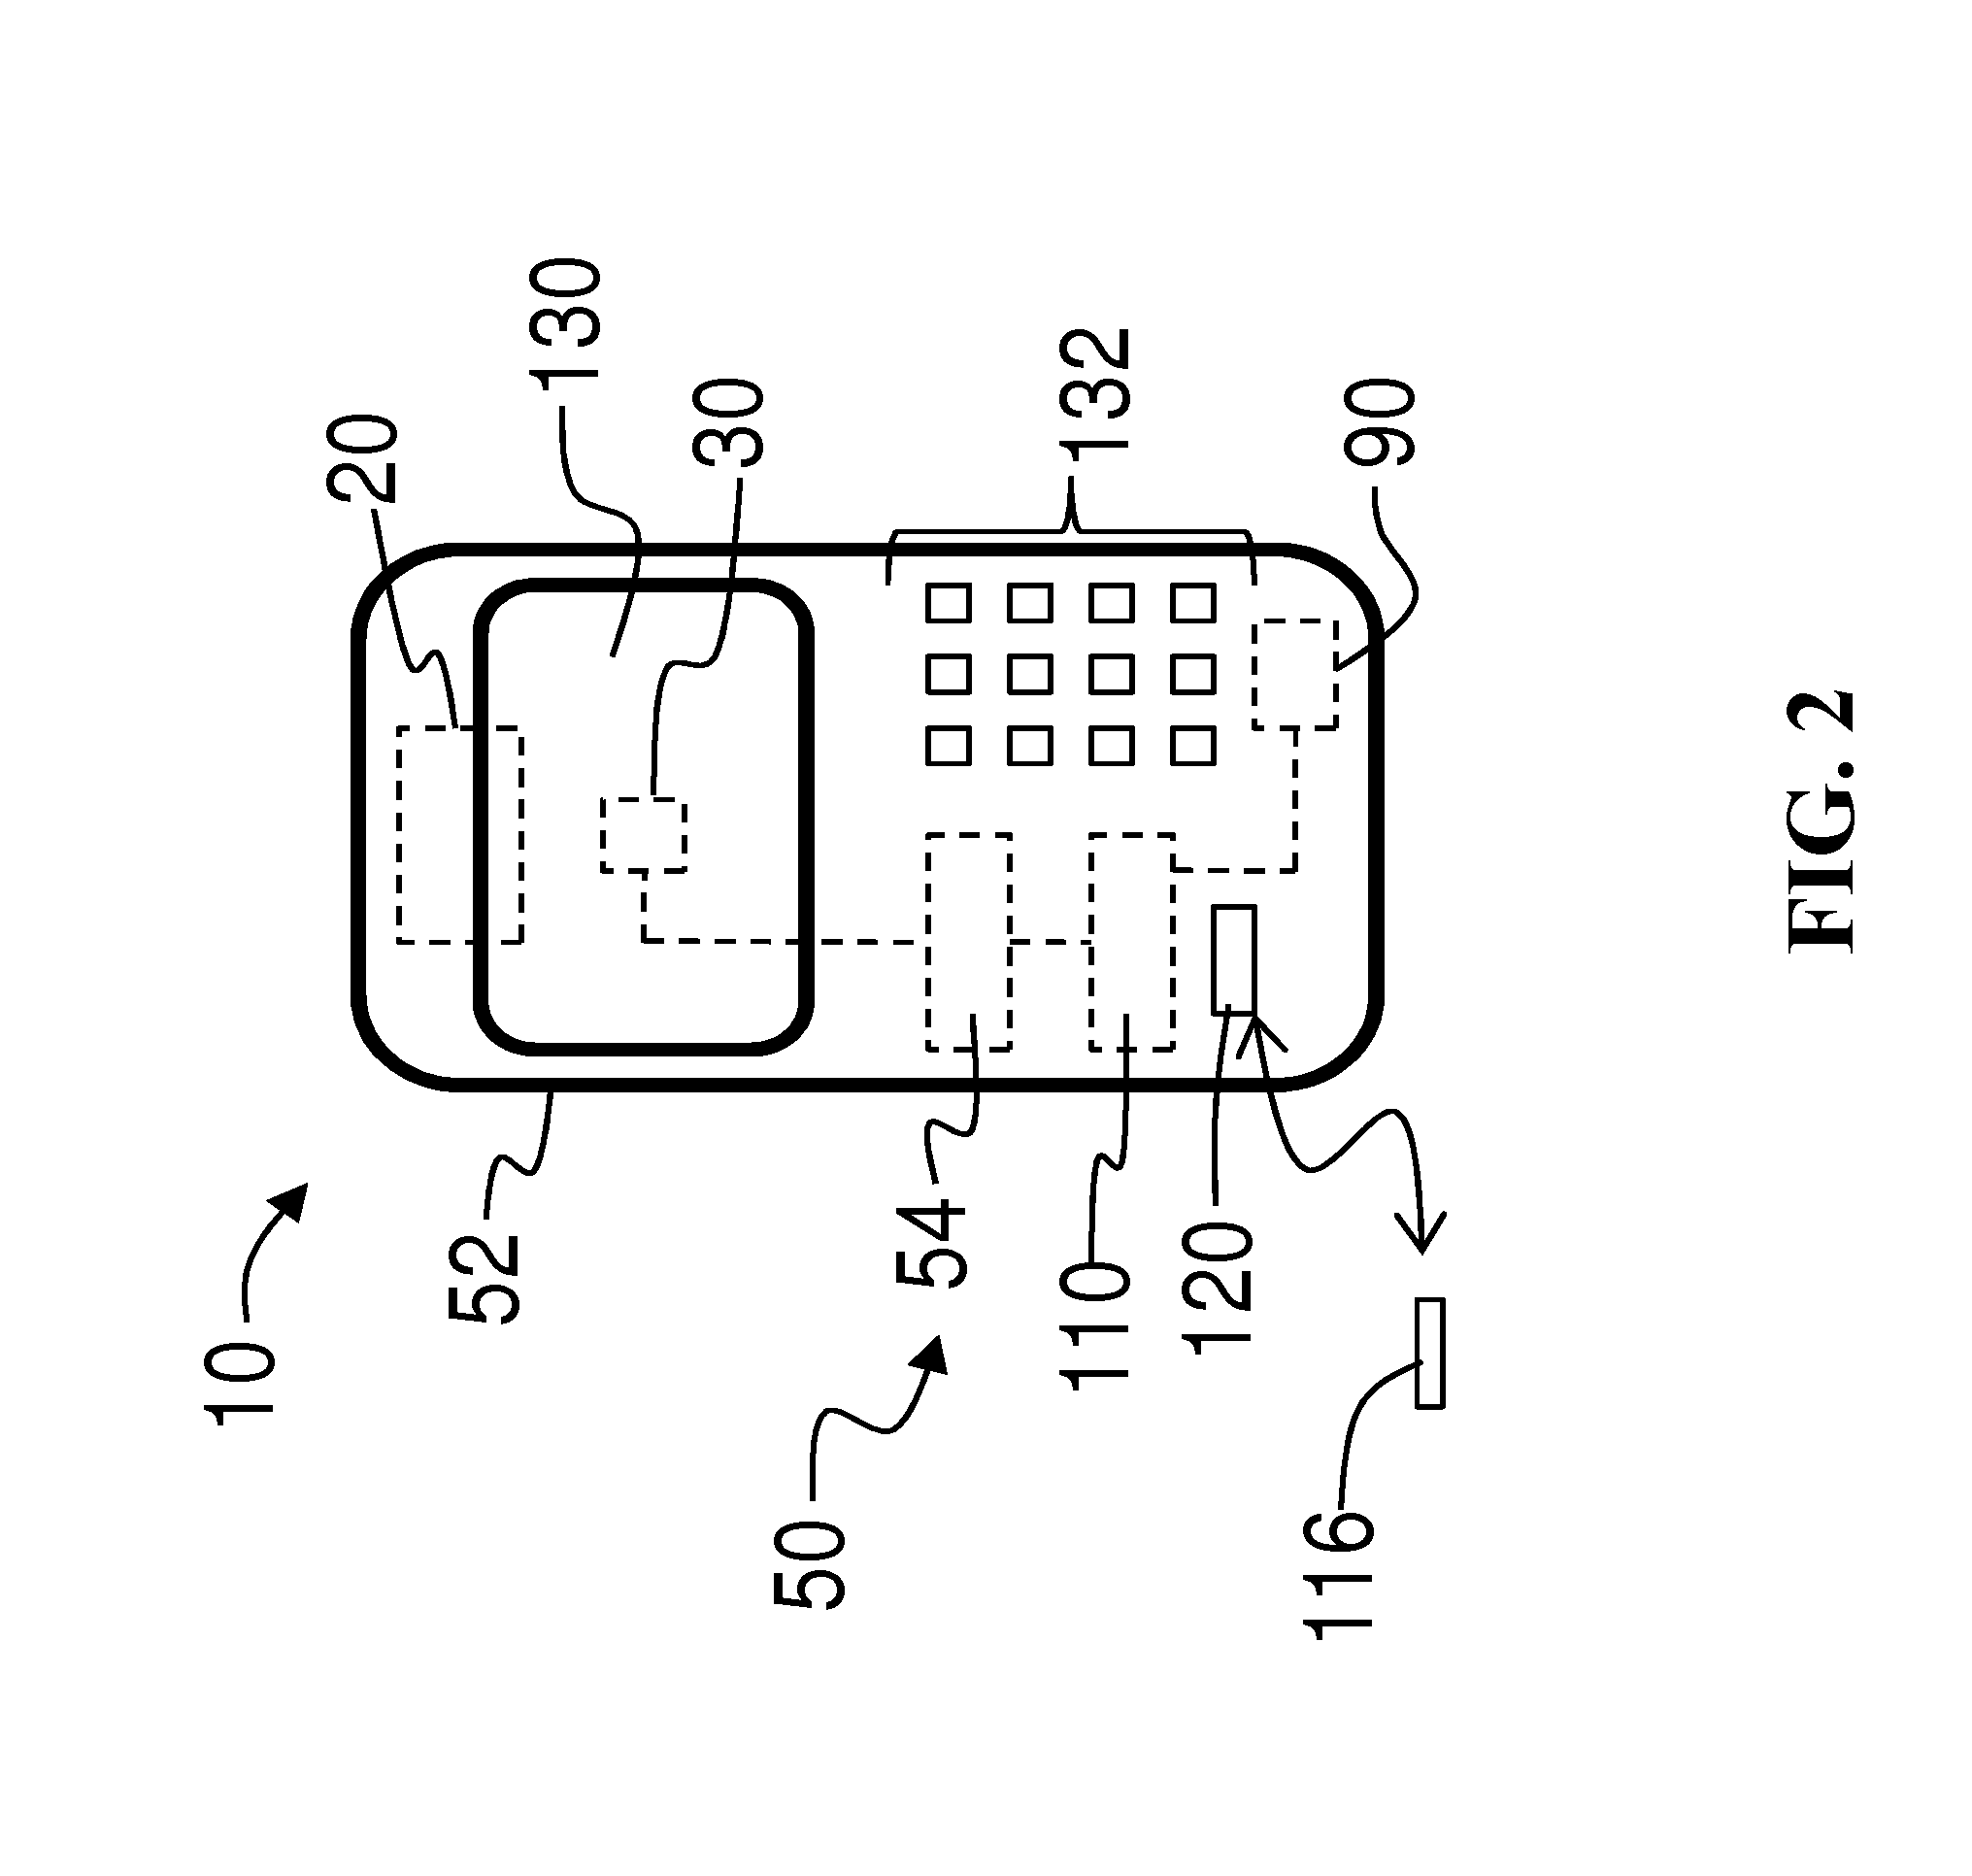 Extended depth-of-field biometric system